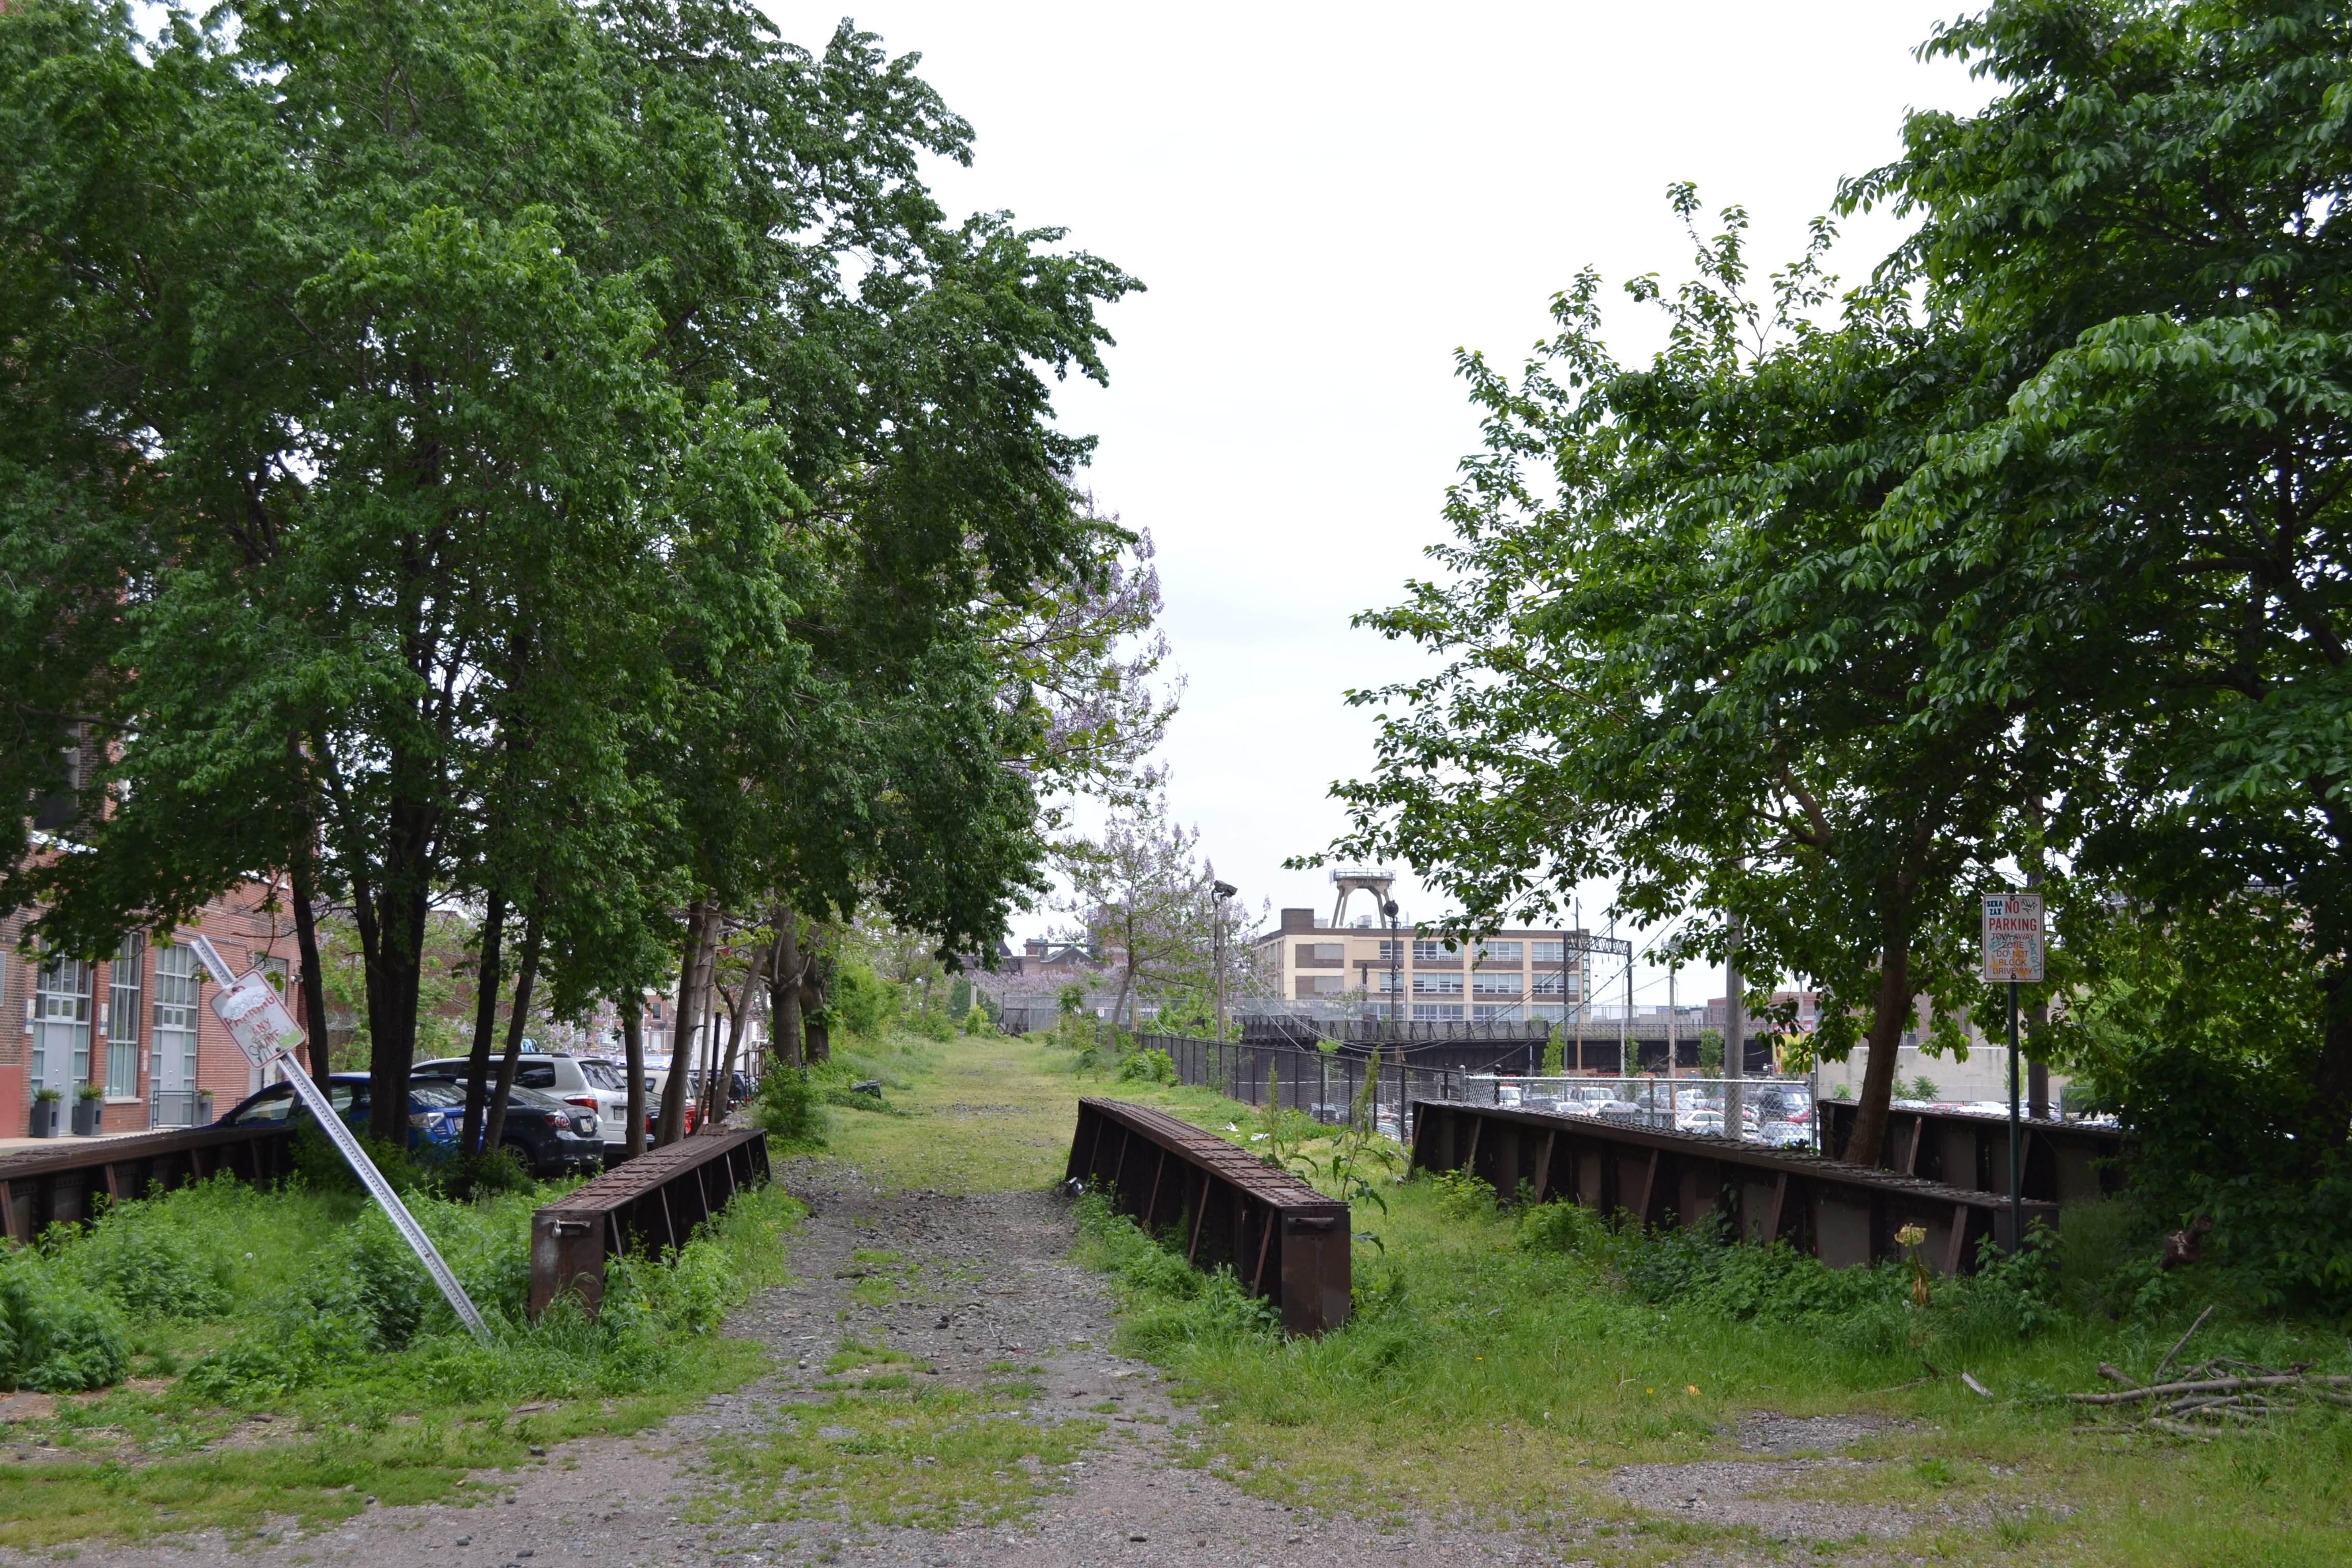 A linear park could potentially pass under Broad Street and emerge onto the elevated Reading Viaduct